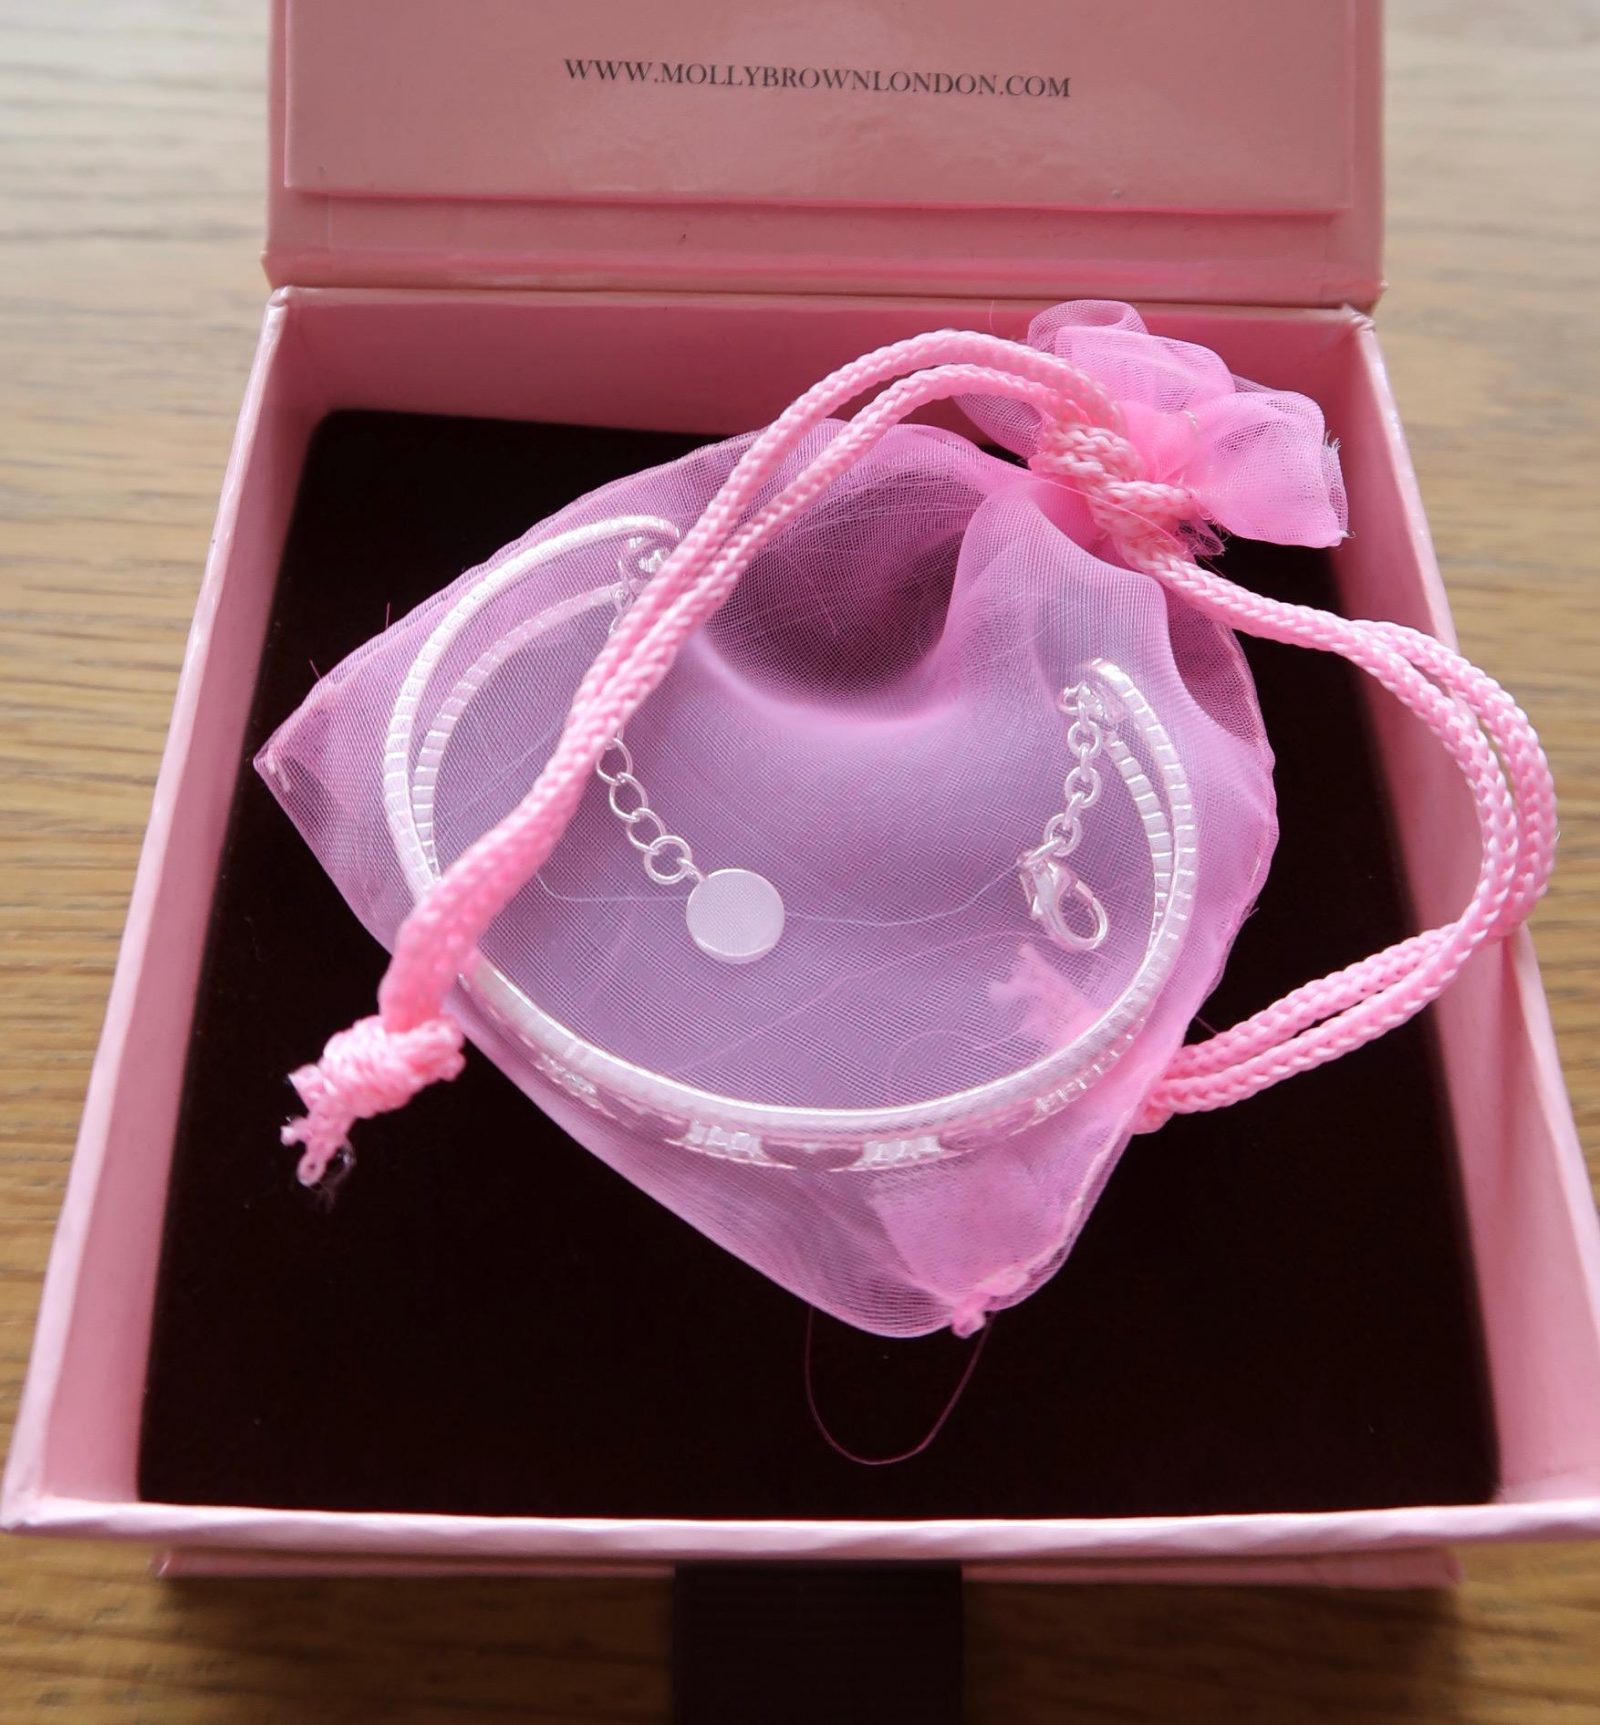 Molly Brown Her love bangle in pink bag and box